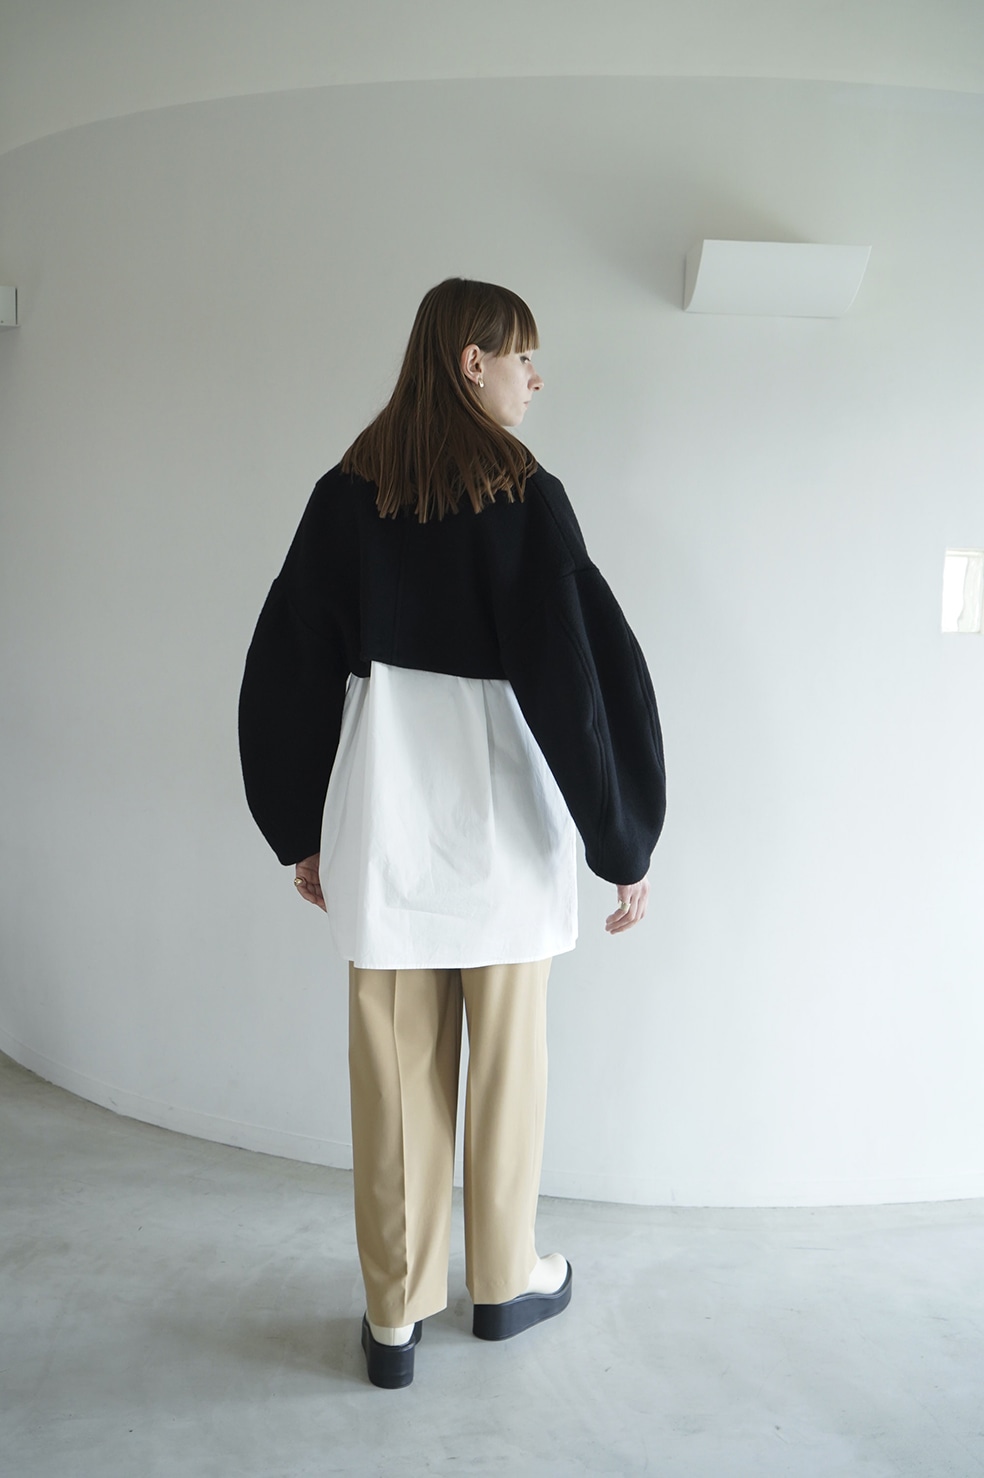 ROUND SLEEVE SHORT JACKET｜OUTER(アウター)｜CLANE OFFICIAL ONLINE